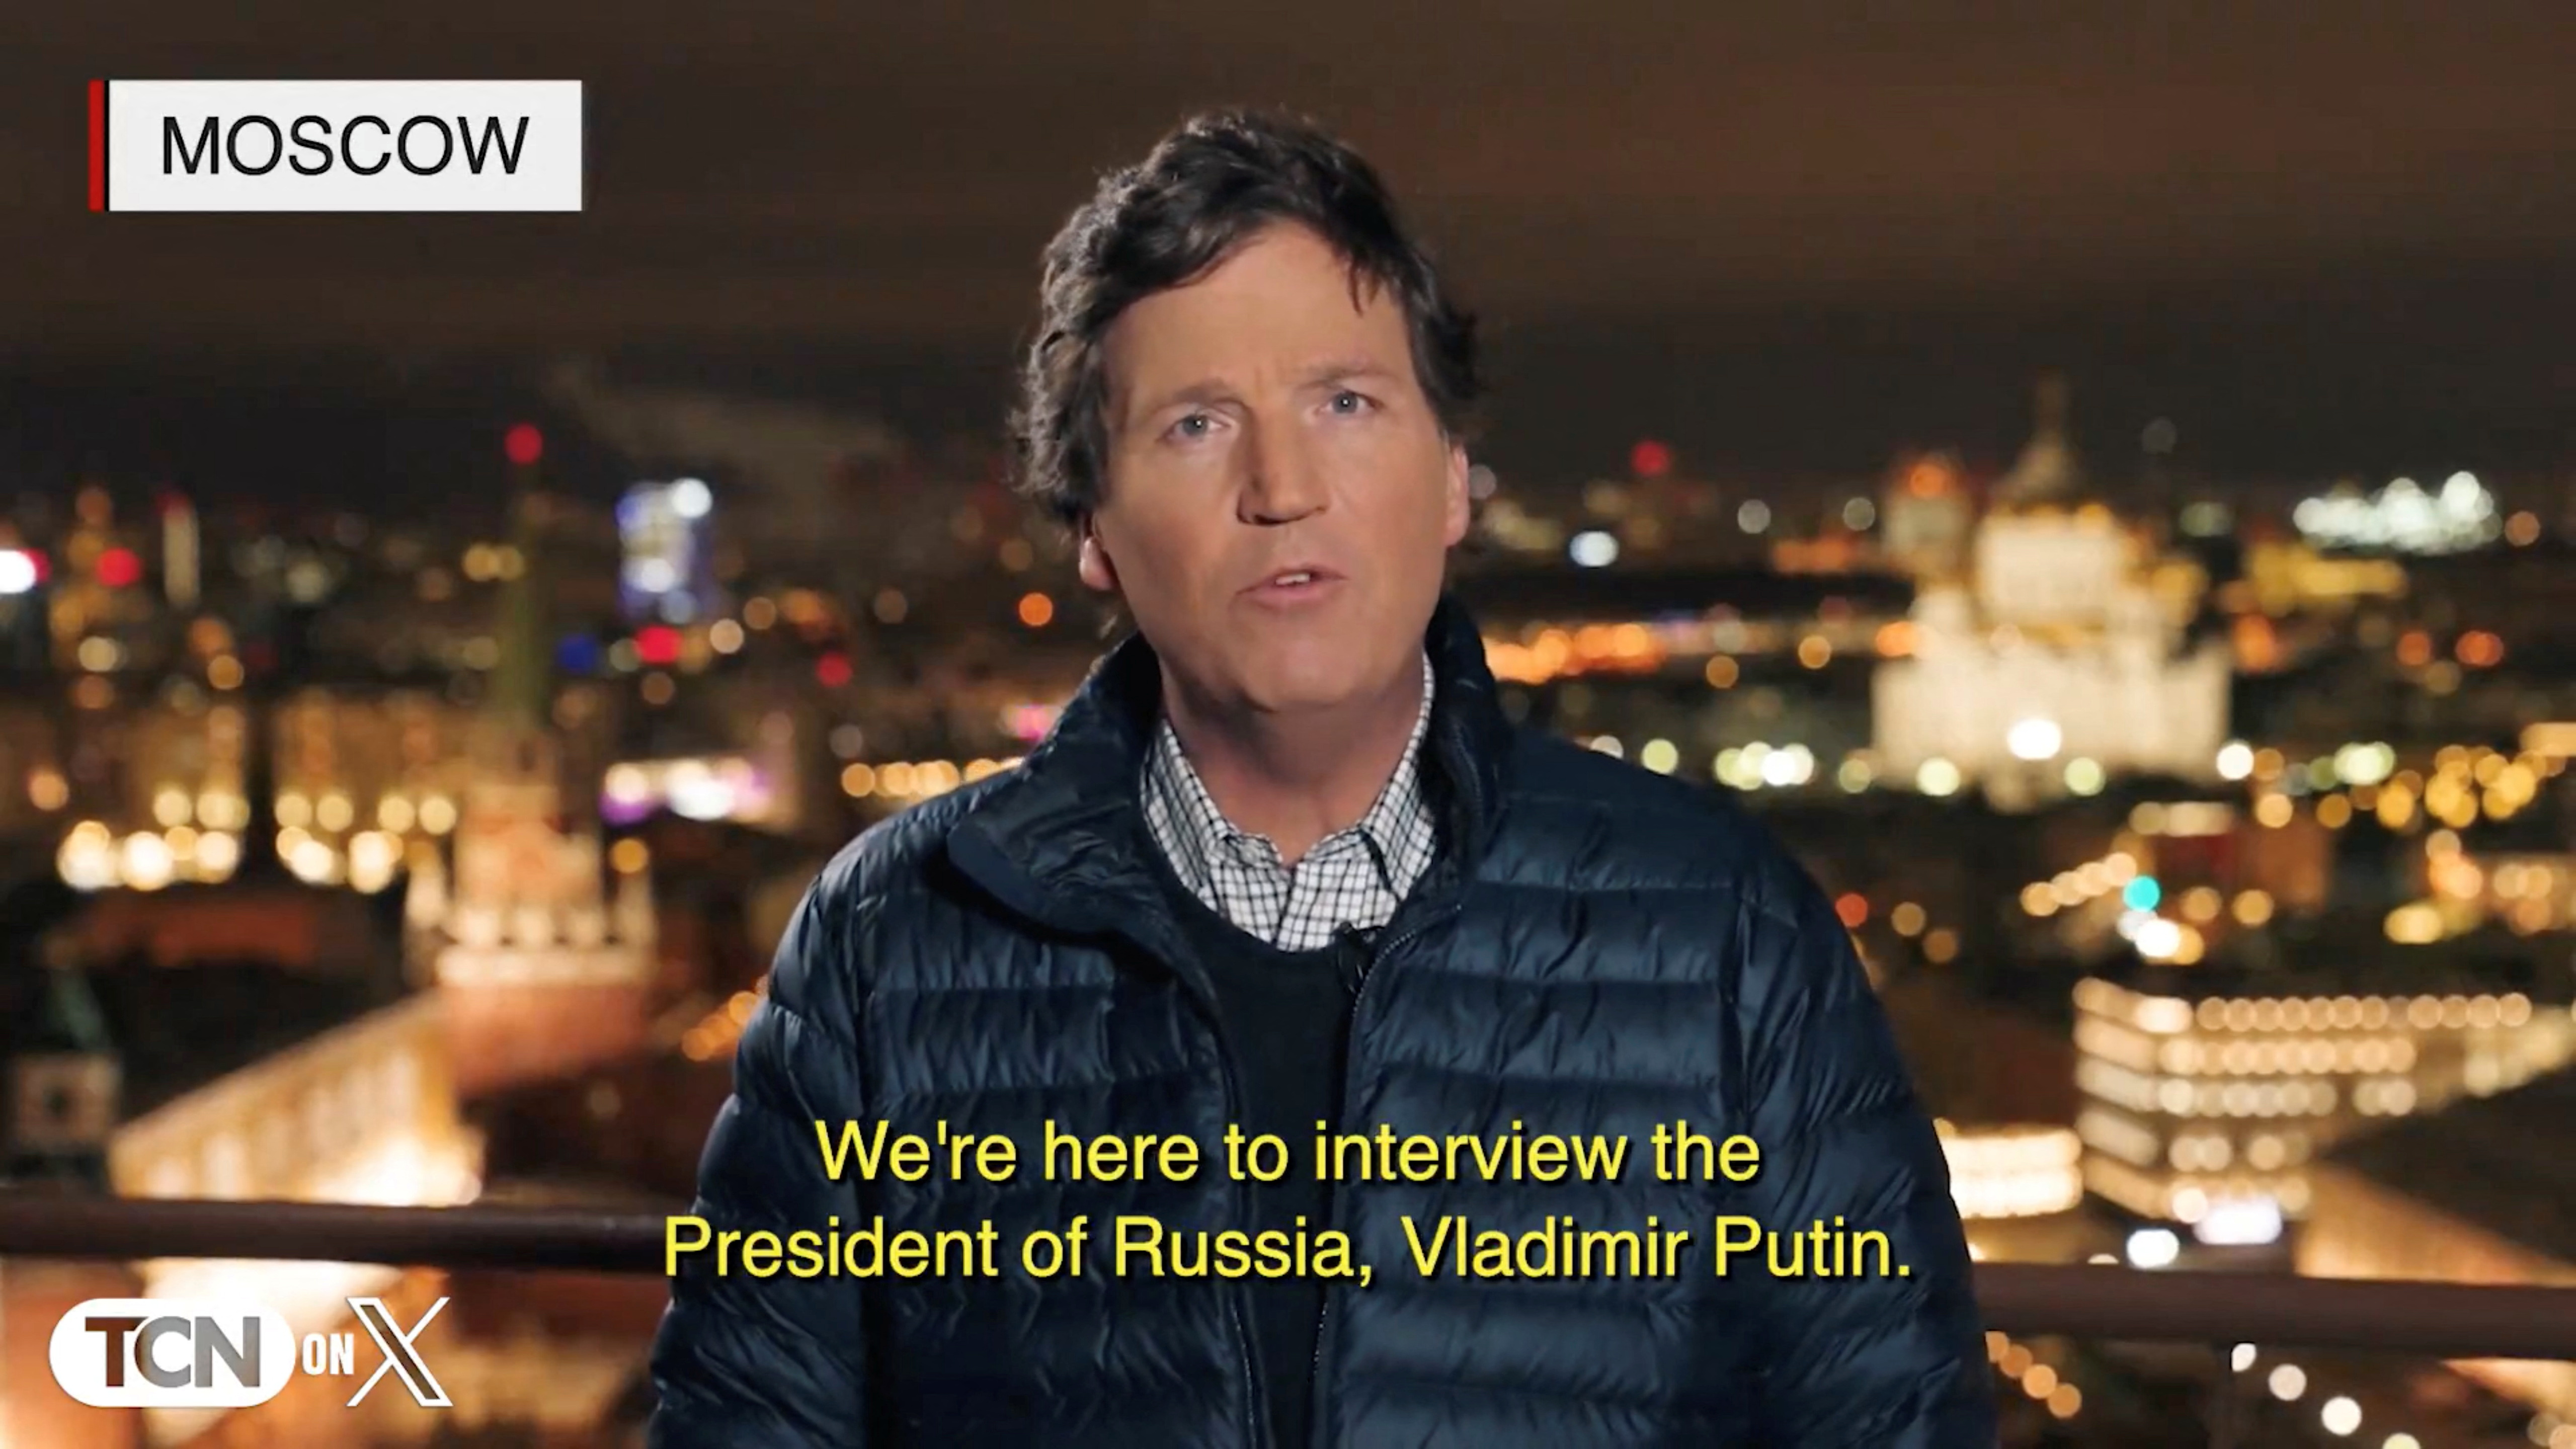 The Tucker Carlson versus Vladimir Putin interview will be released at 11pm GMT